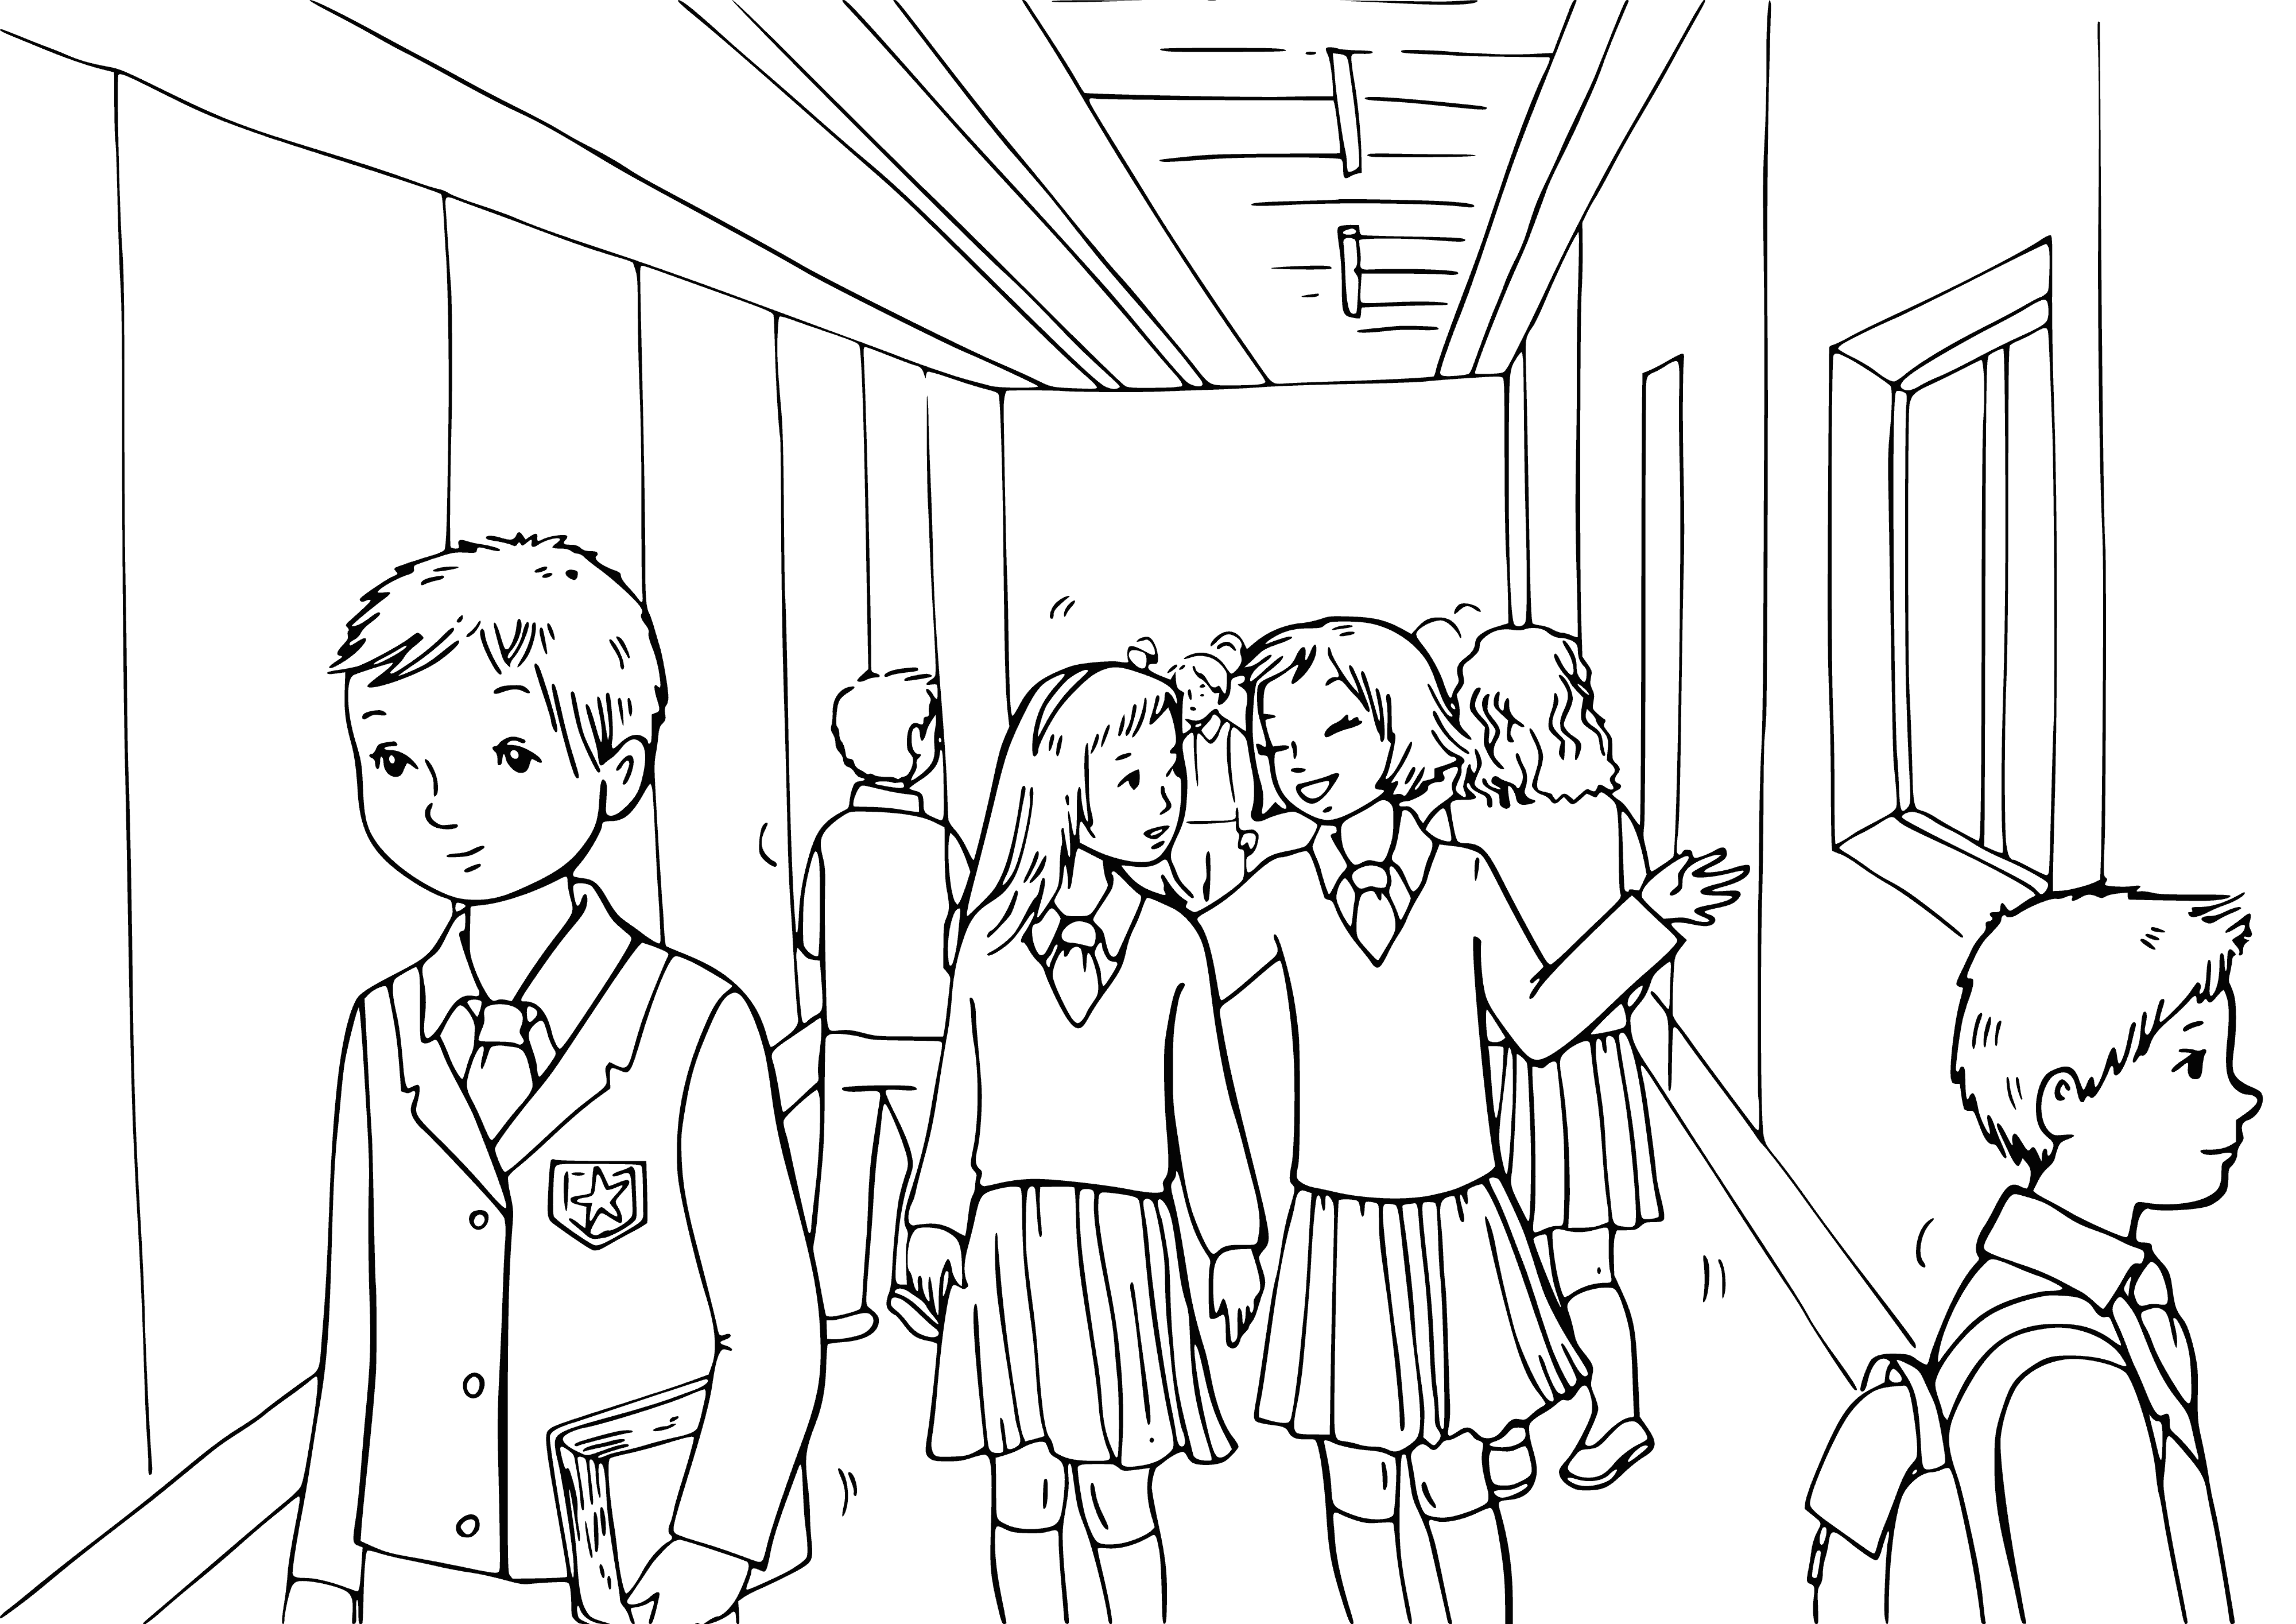 coloring page: Kids & adults standing outside school, waving goodbye as they head off for their break. Blue sky, trees, houses in background.